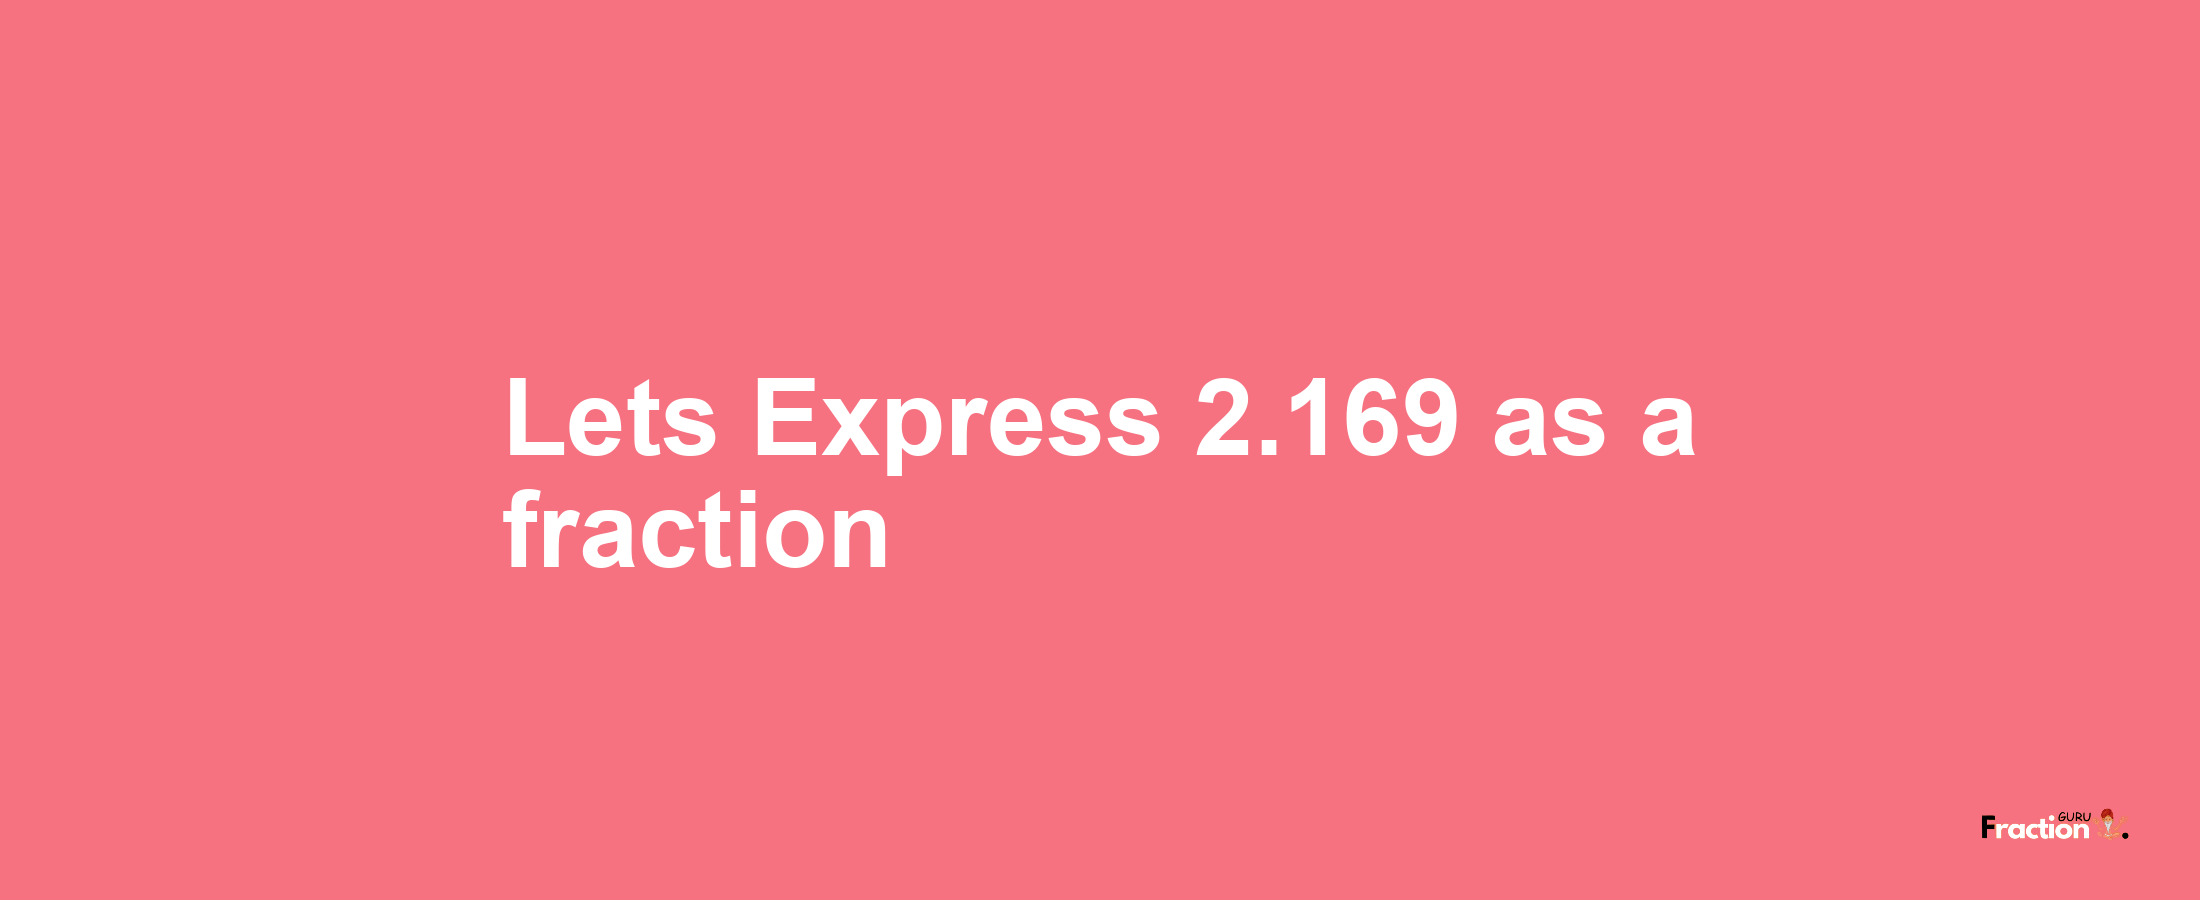 Lets Express 2.169 as afraction